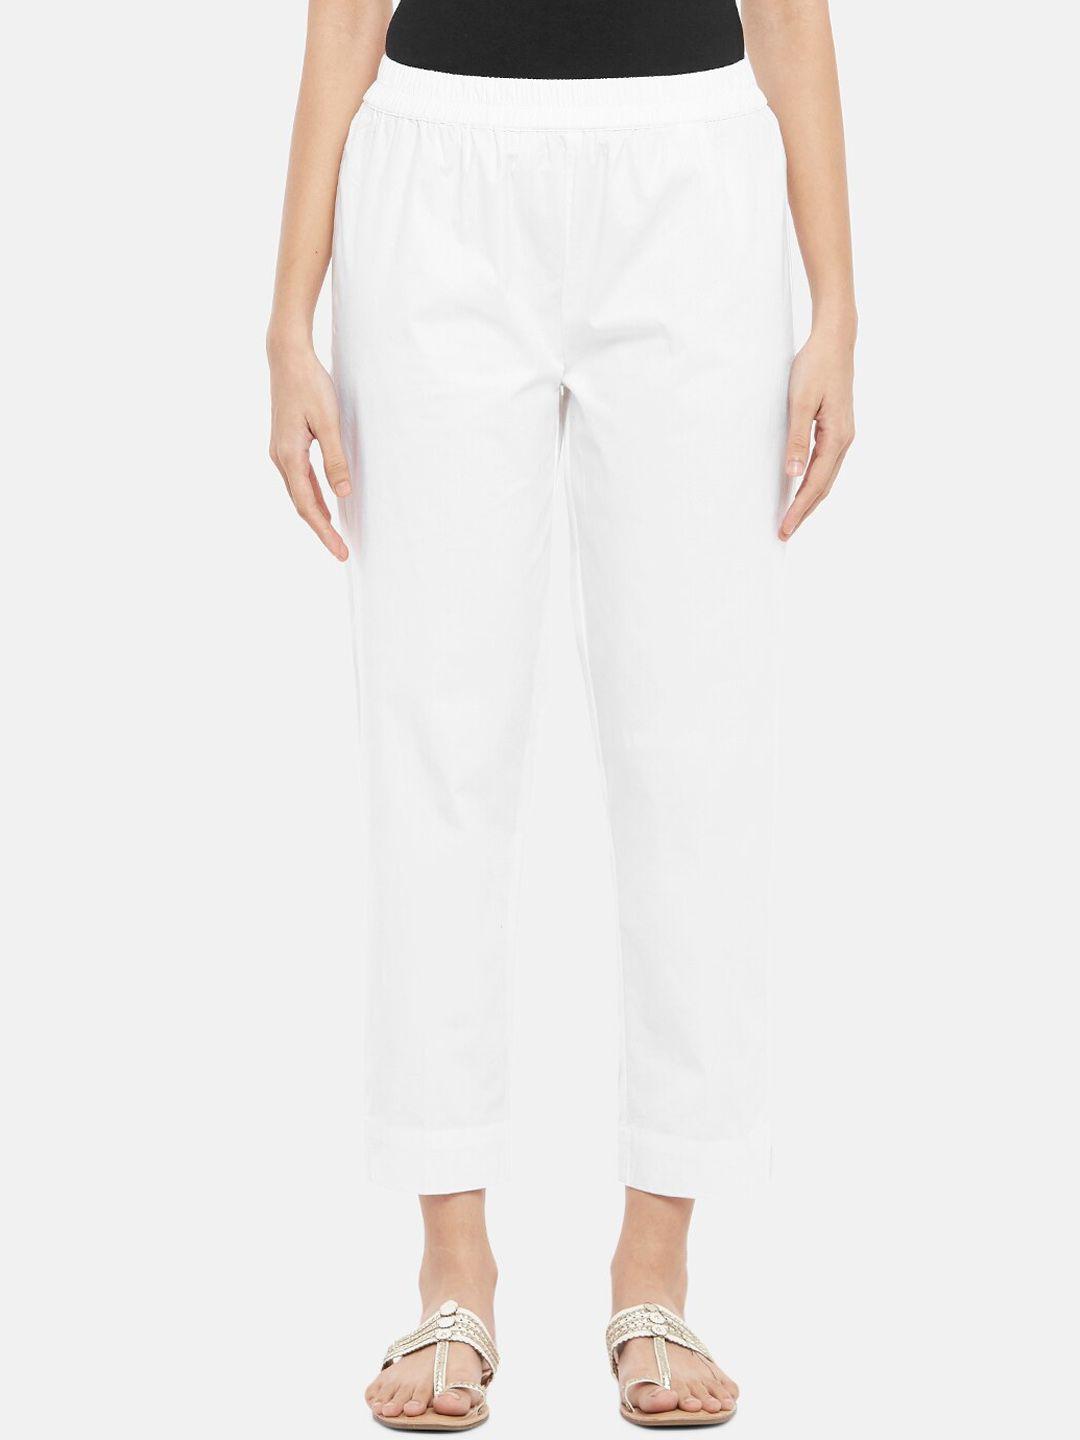 rangmanch by pantaloons women white solid trousers